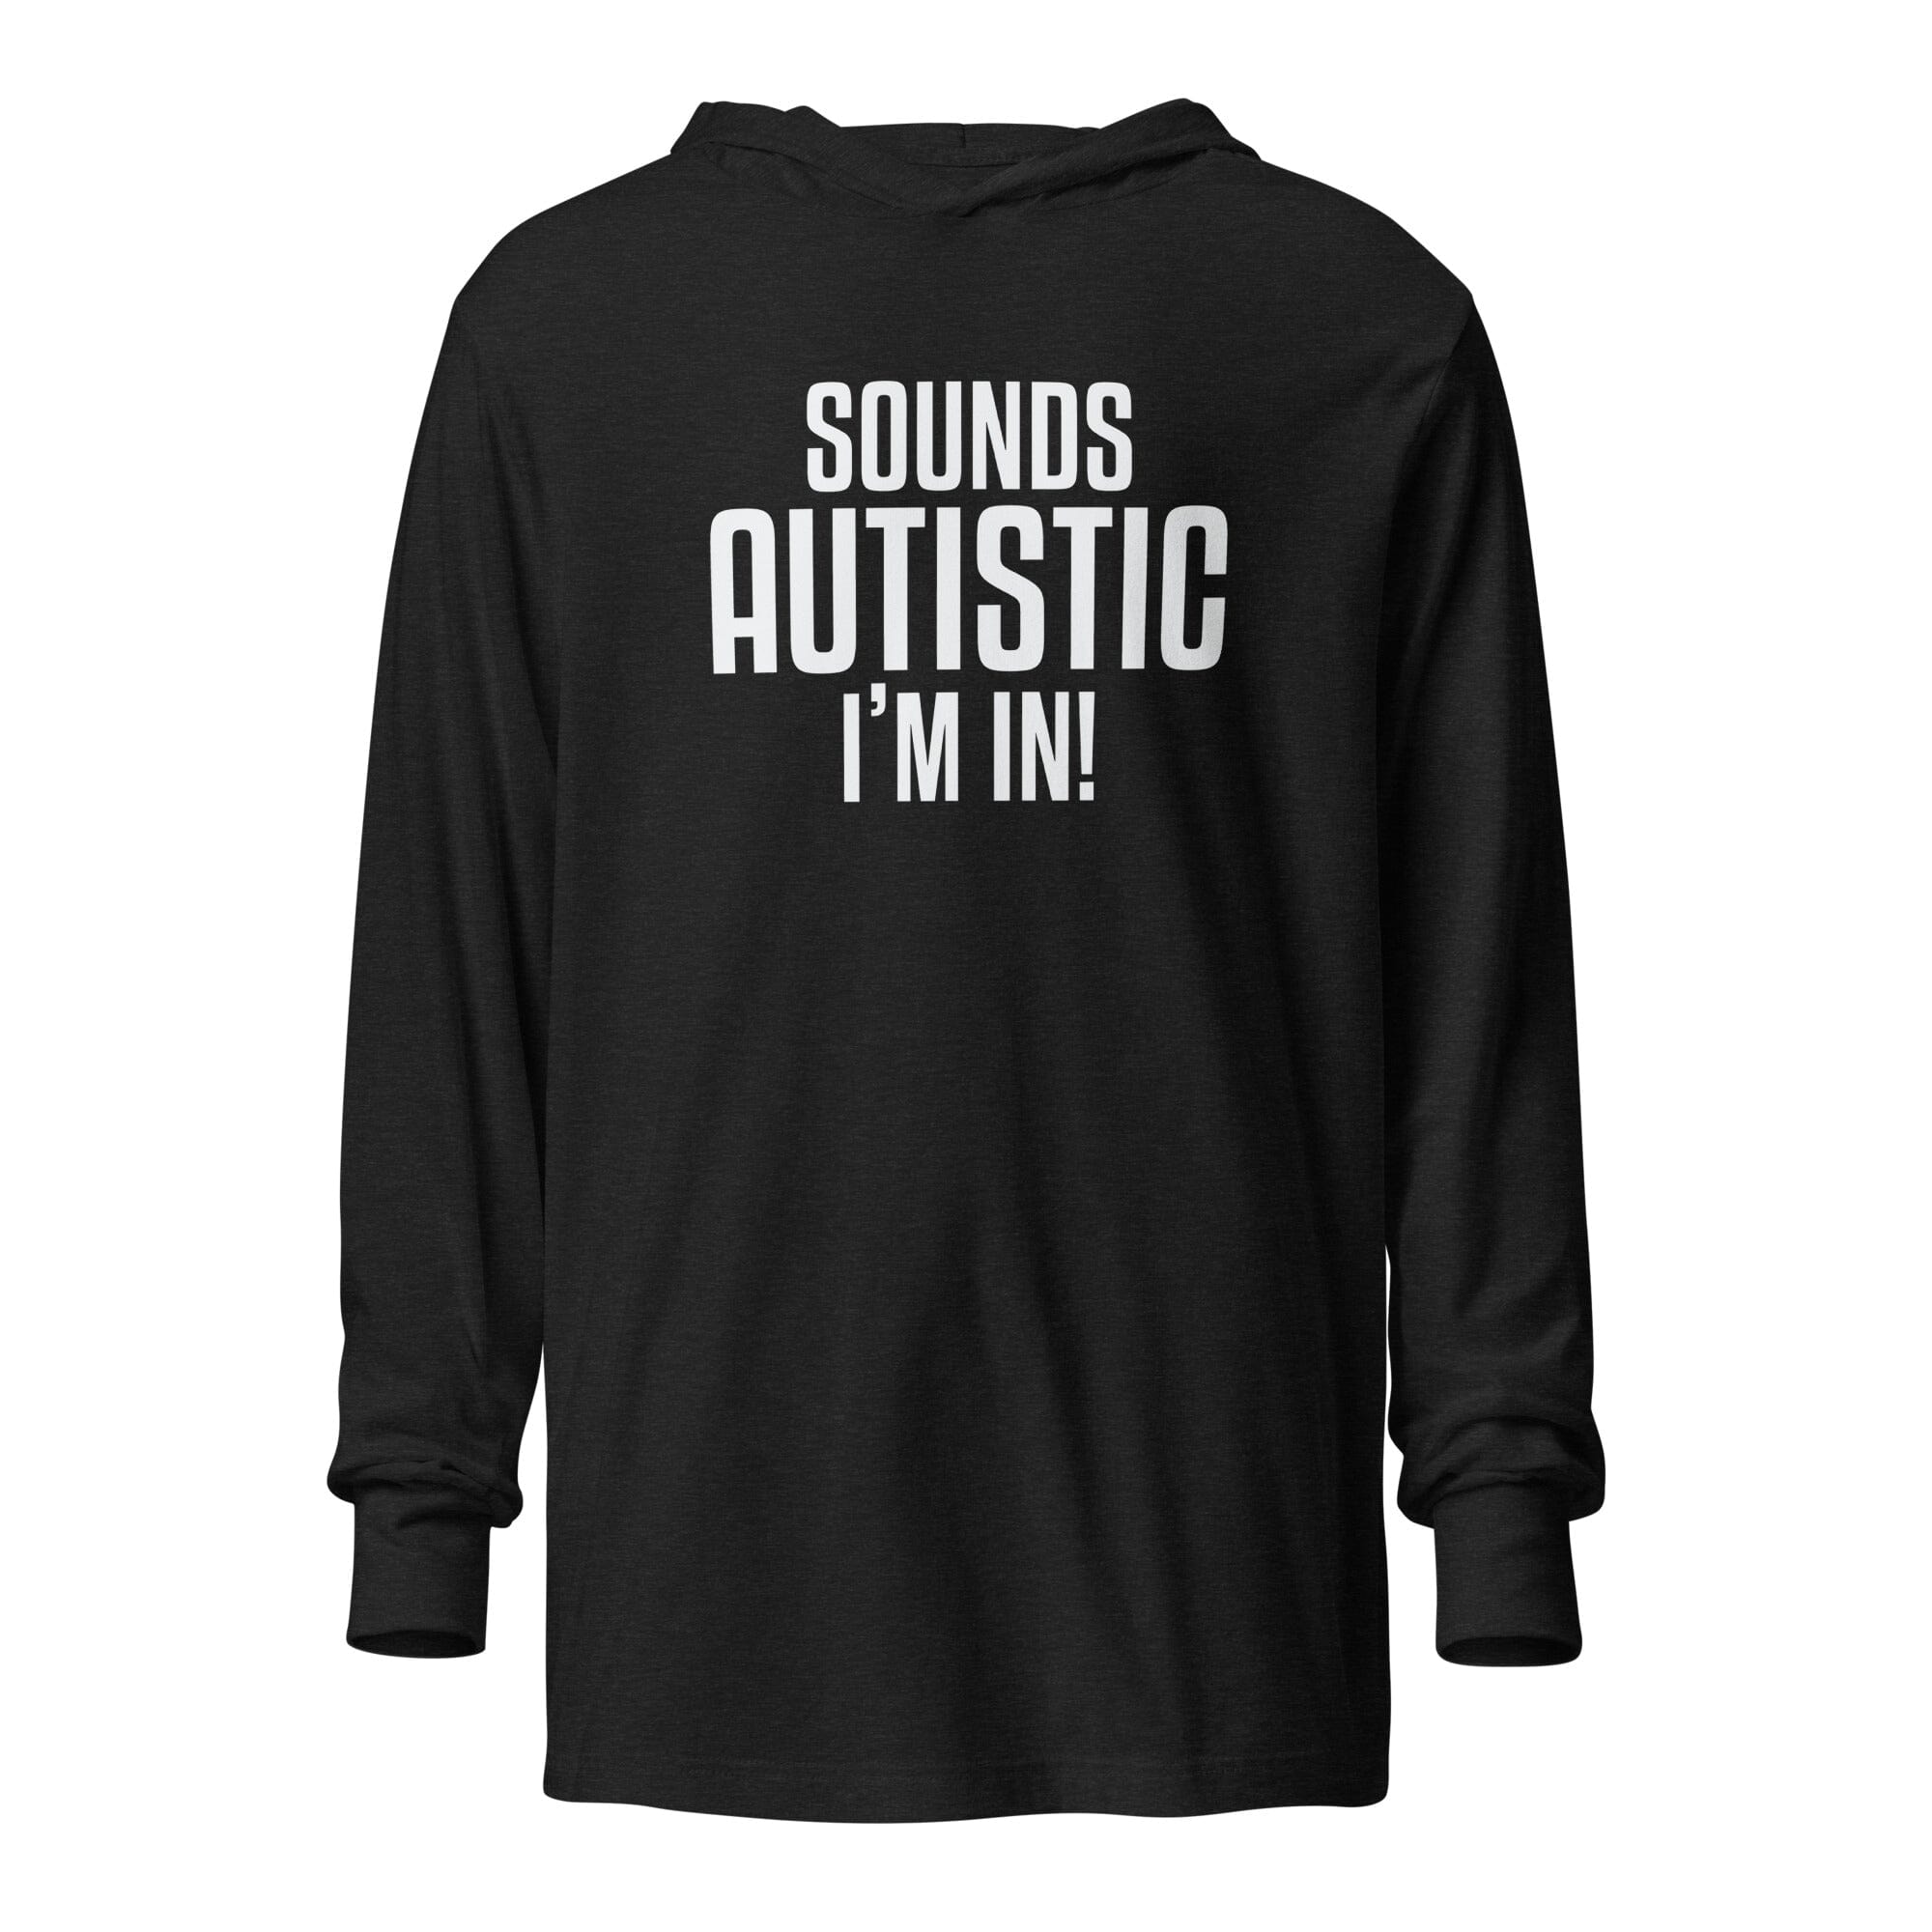 Sounds Autistic I'm In Unisex Hooded long-sleeve tee The Autistic Innovator Charcoal-Black Triblend XS 